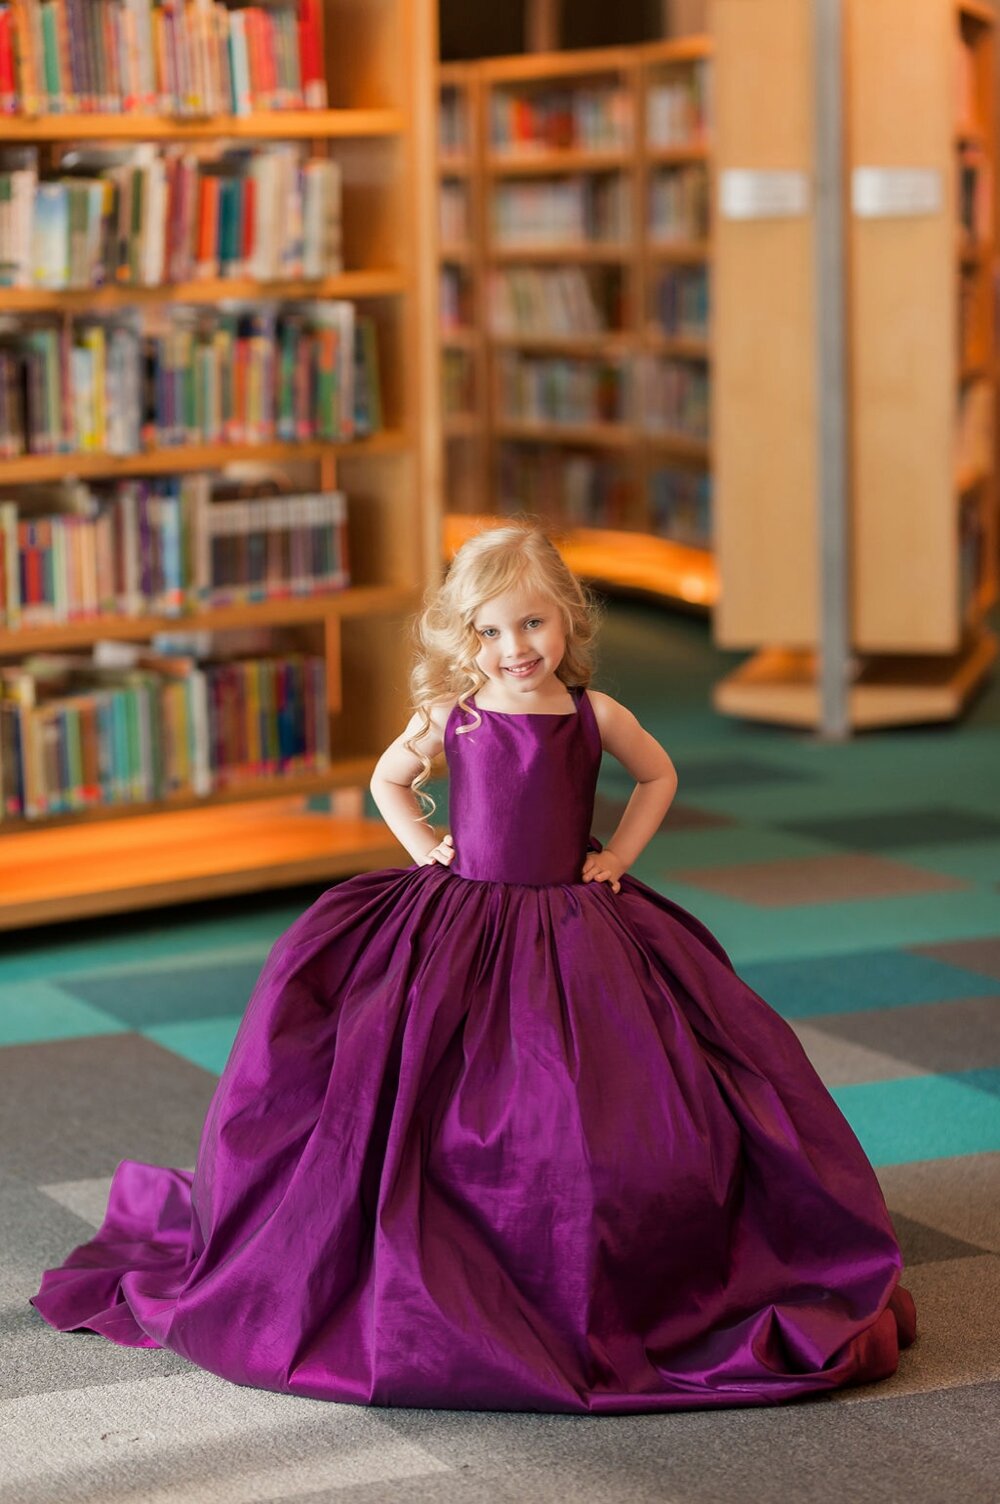 Indianapolis-Central-Public-Library-Traveling-Dress-Indy-Family-Photo_0021.jpg